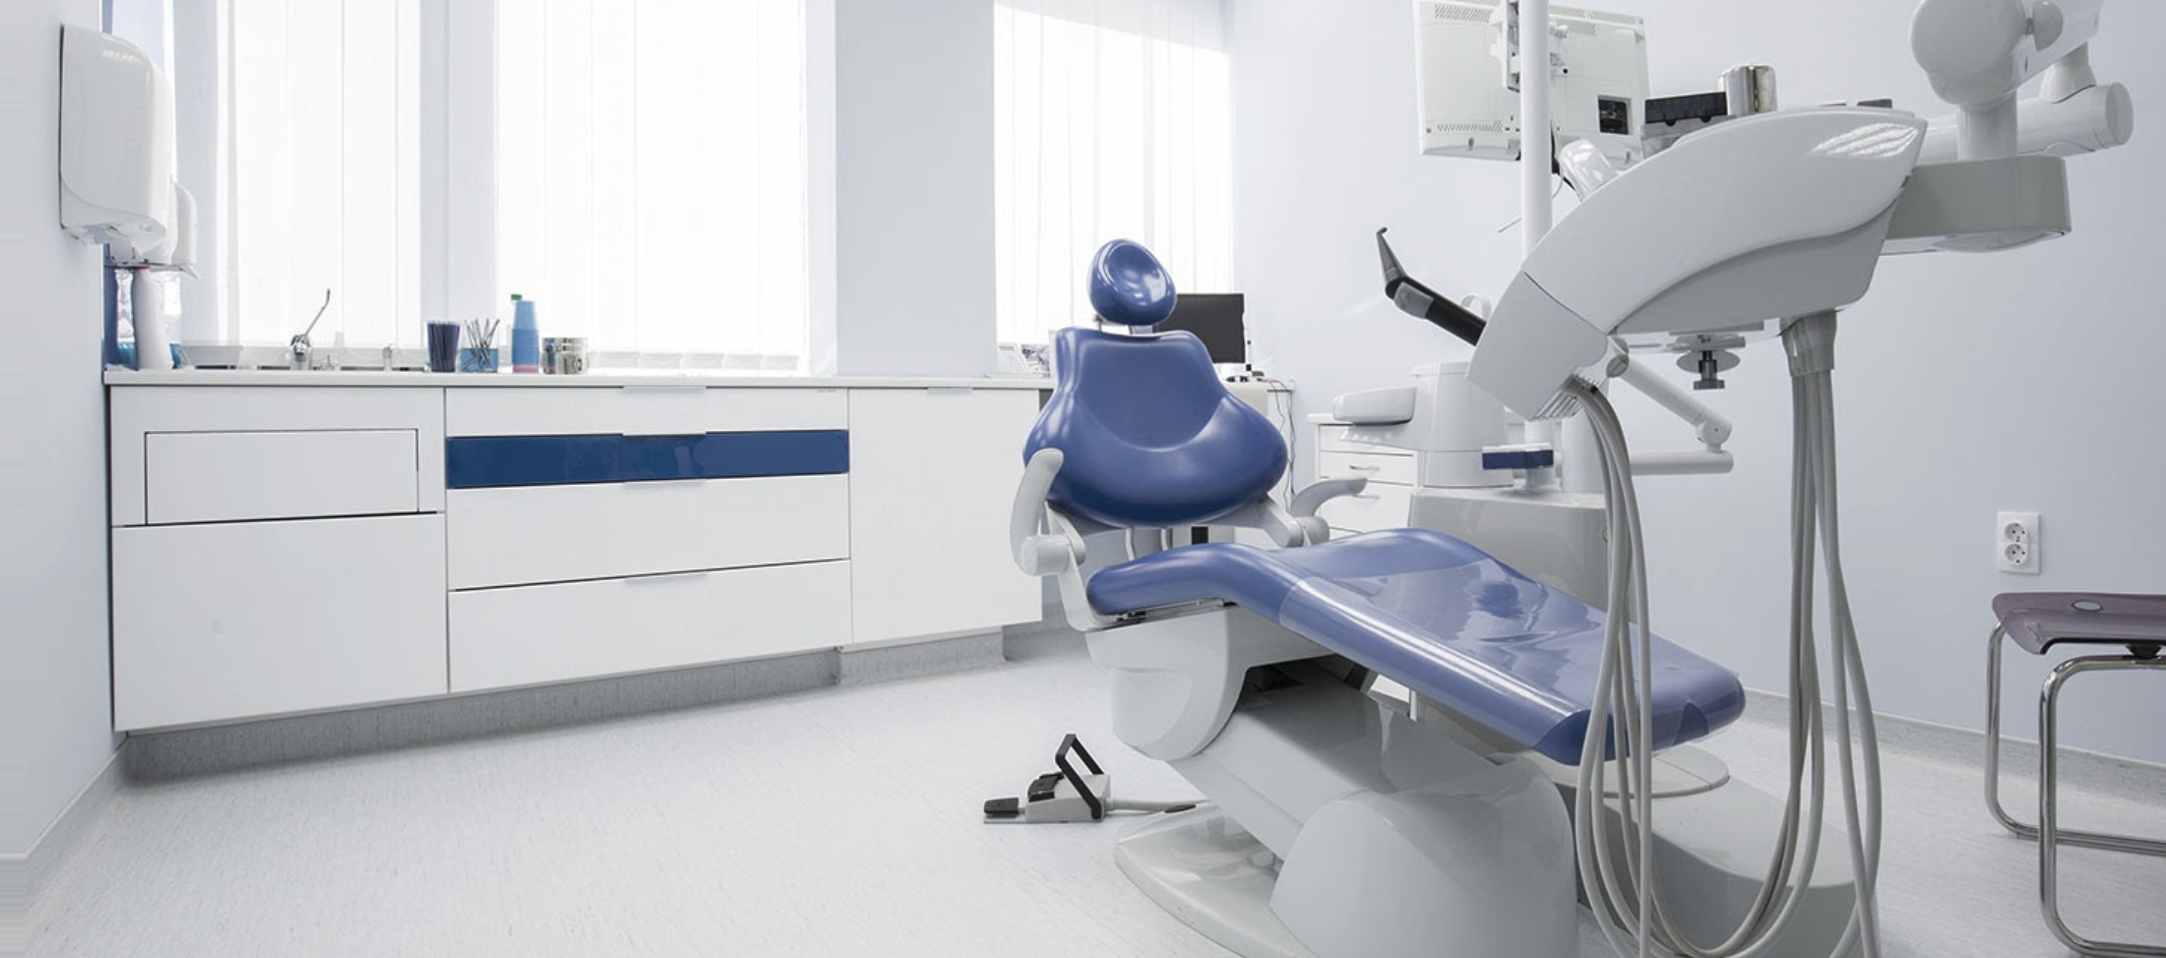 Interior of James M. Vlassis, DDS | Fayetteville, NY